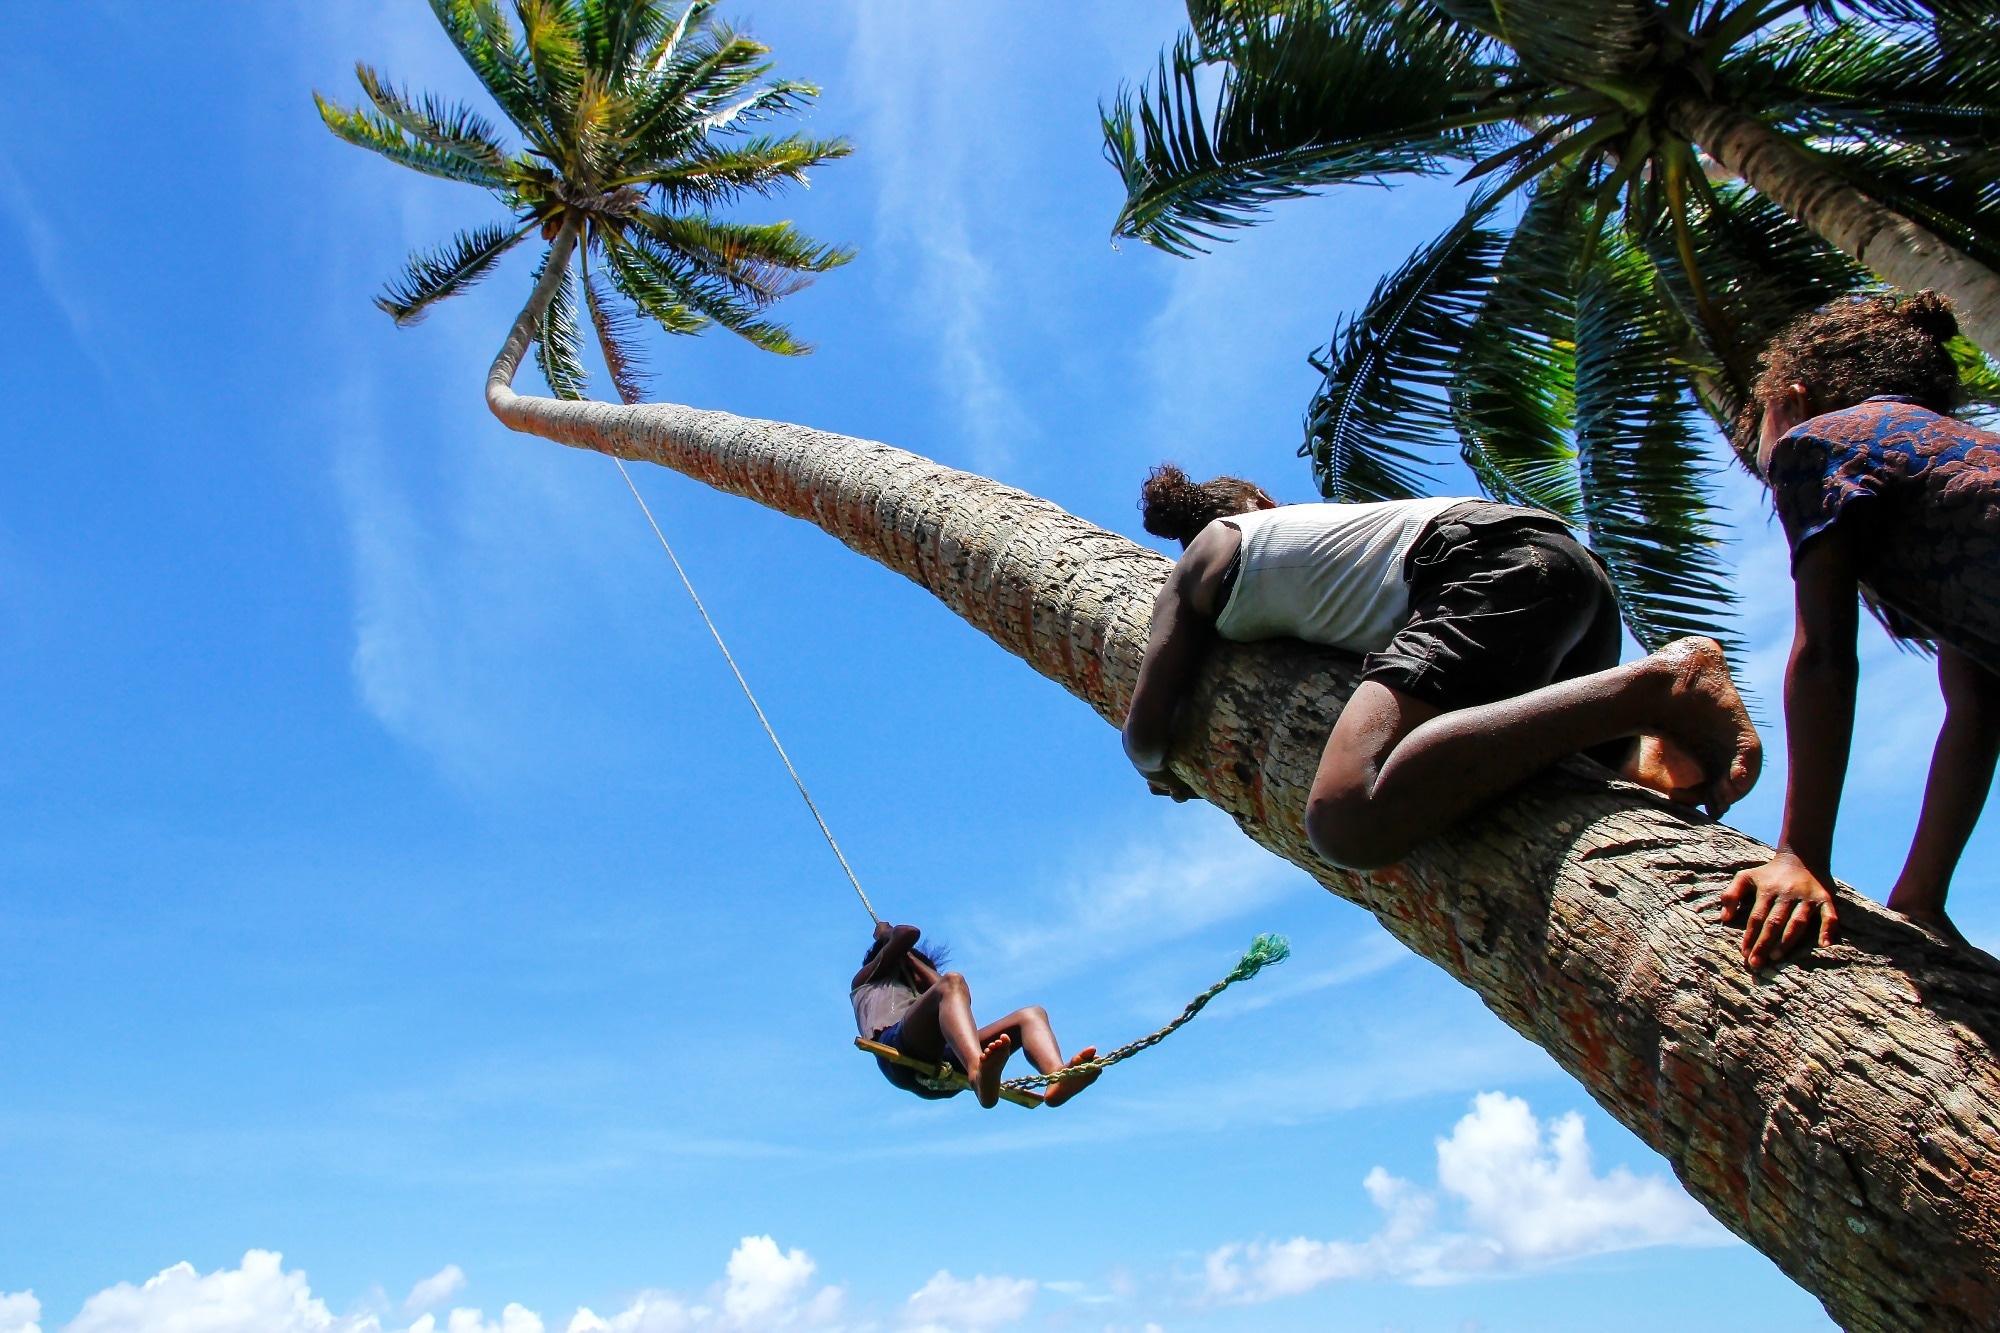 Study: High life satisfaction reported among small-scale societies with low incomes. Local kids swinging on a rope swing,Fiji. Image Credit: Don Mammoser / Shutterstock